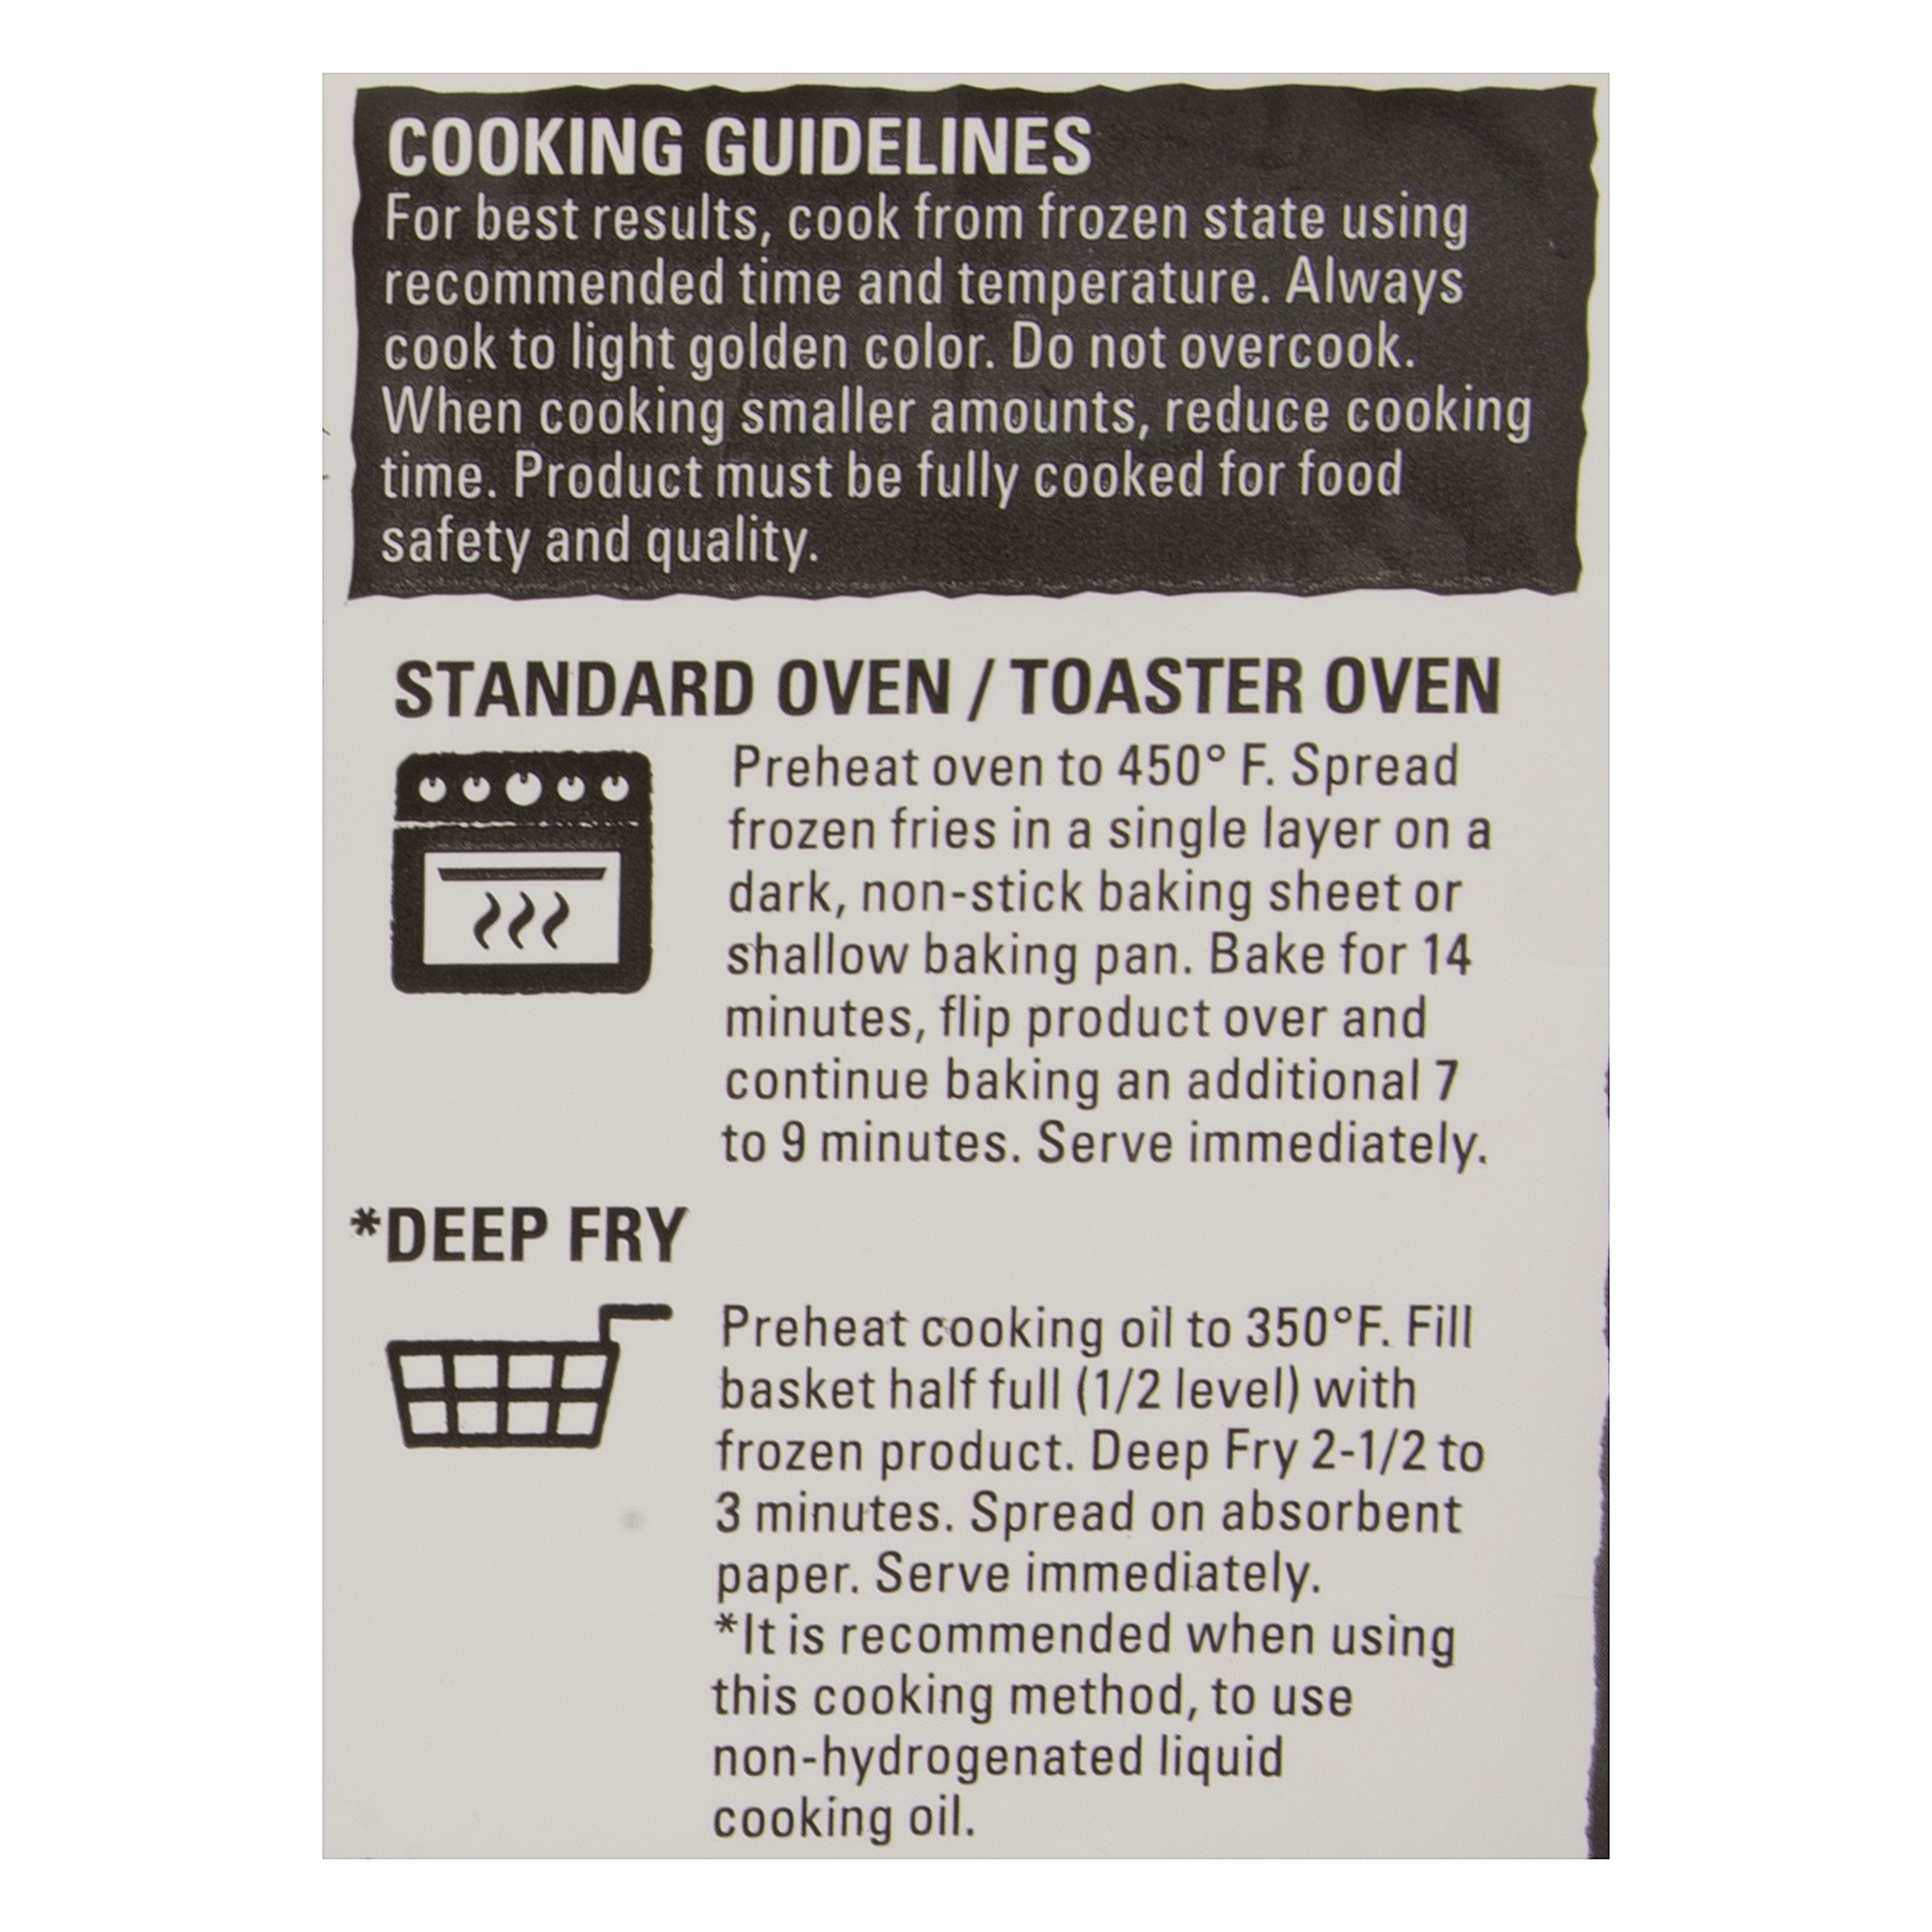 McCain, Beer Battered Thin Cut Fries, 22 oz Plastic Bag (Frozen) - image 2 of 10